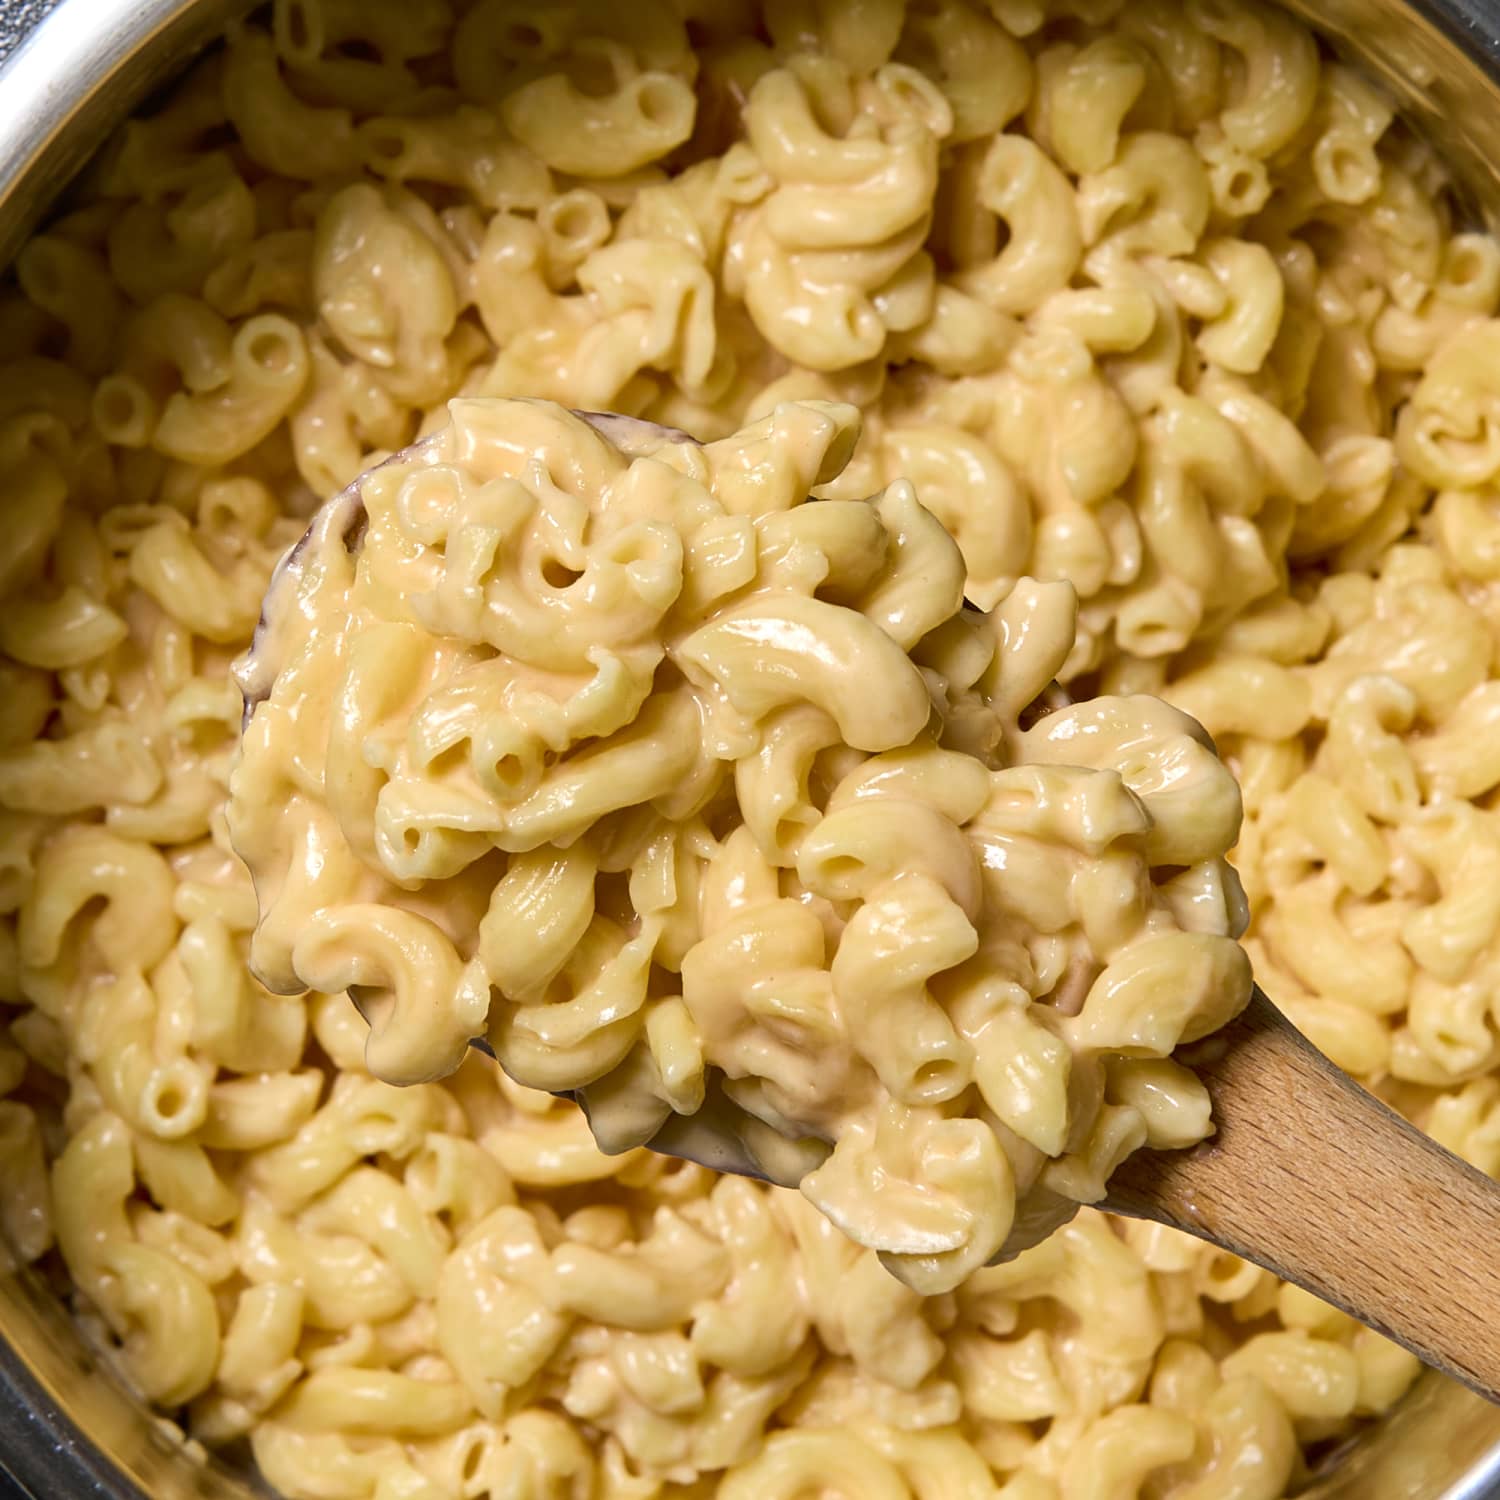 Instant Pot Mac and Cheese Recipe - How To Make Instant Pot Mac and Cheese